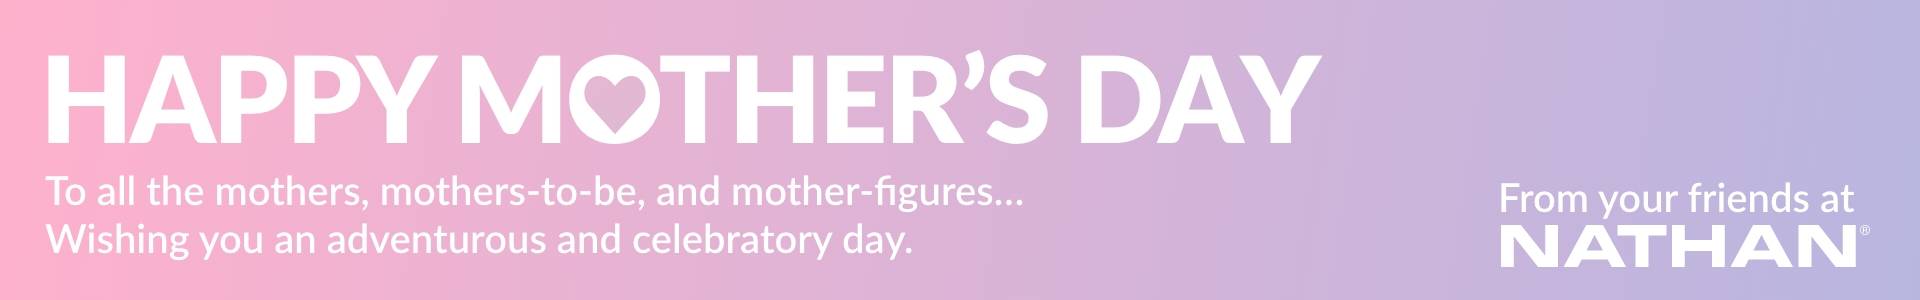 Happy Mother's Day - To all the mothers, mothers-to-be, and mother-figures...Wishing you an adventurous and celebratory day. From Your Friends at Nathan